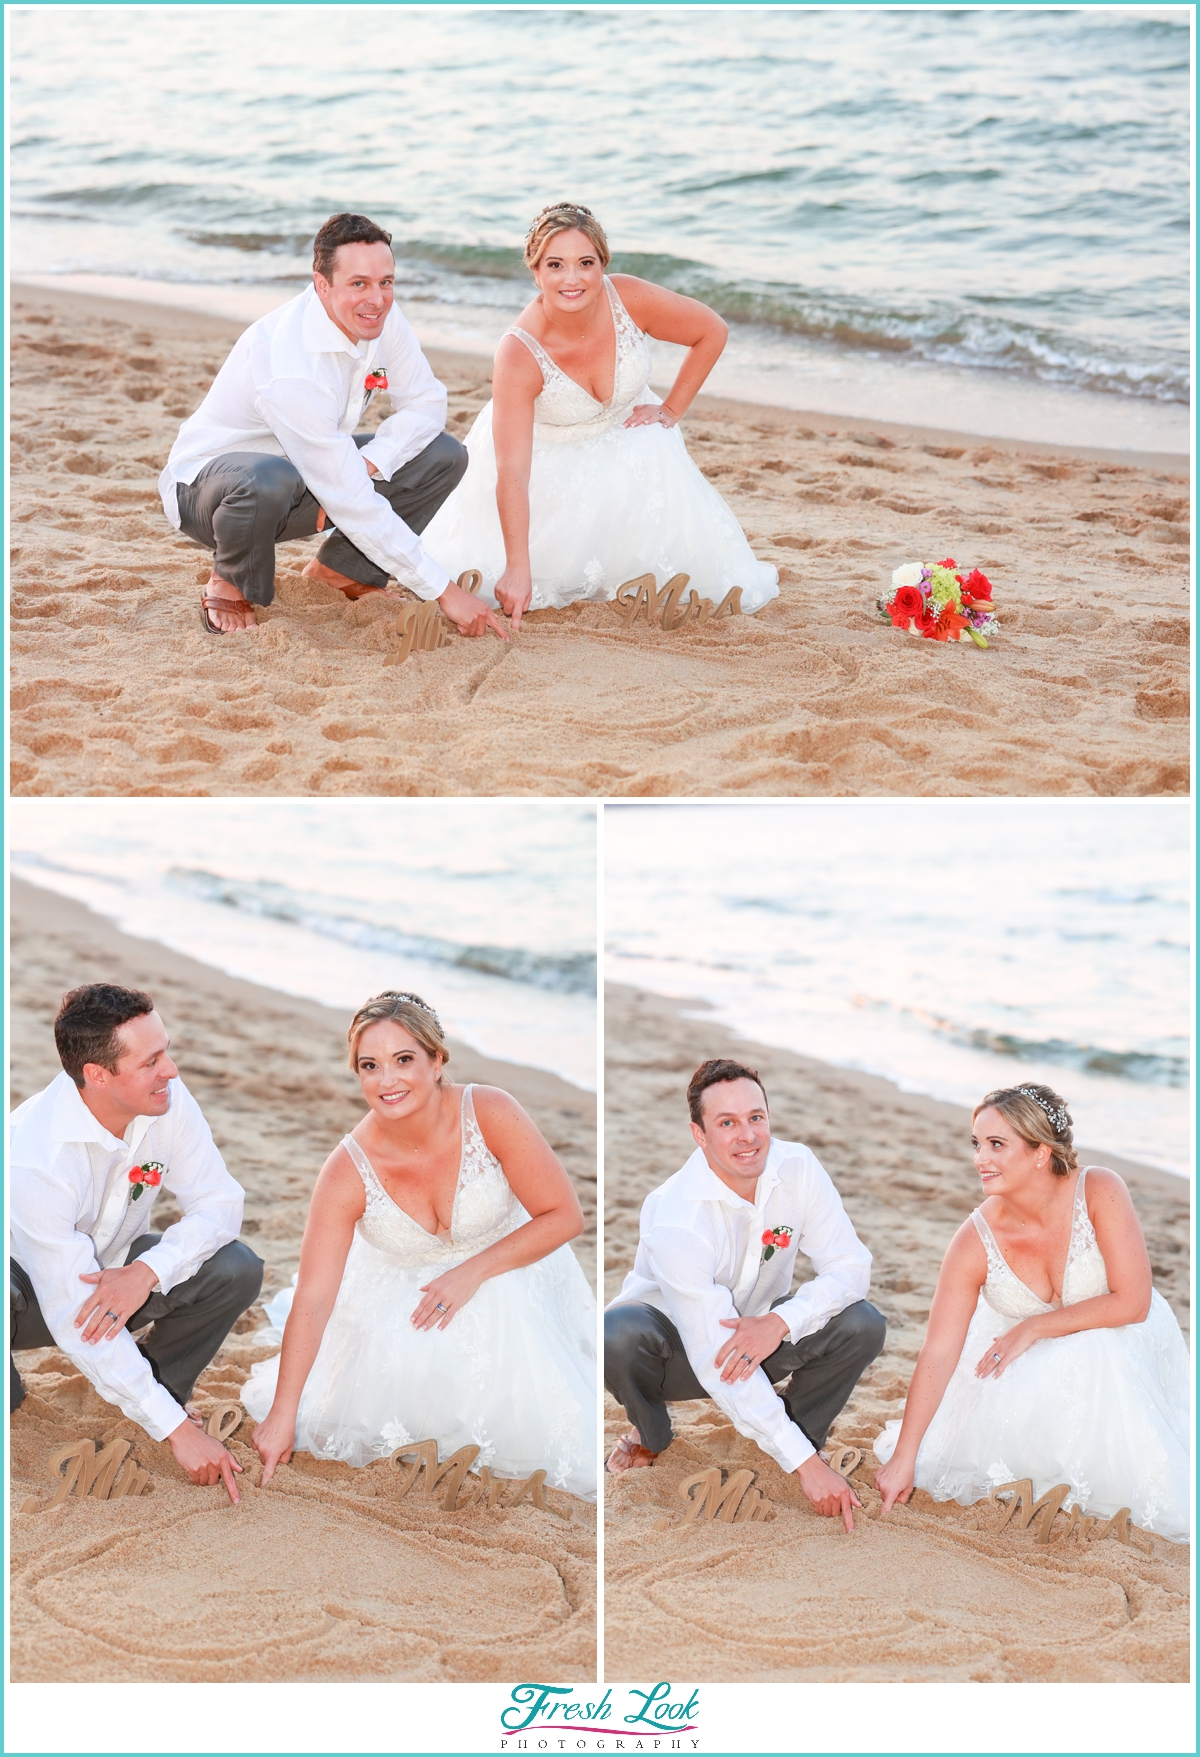 Mr and Mrs in the sand photo ideas